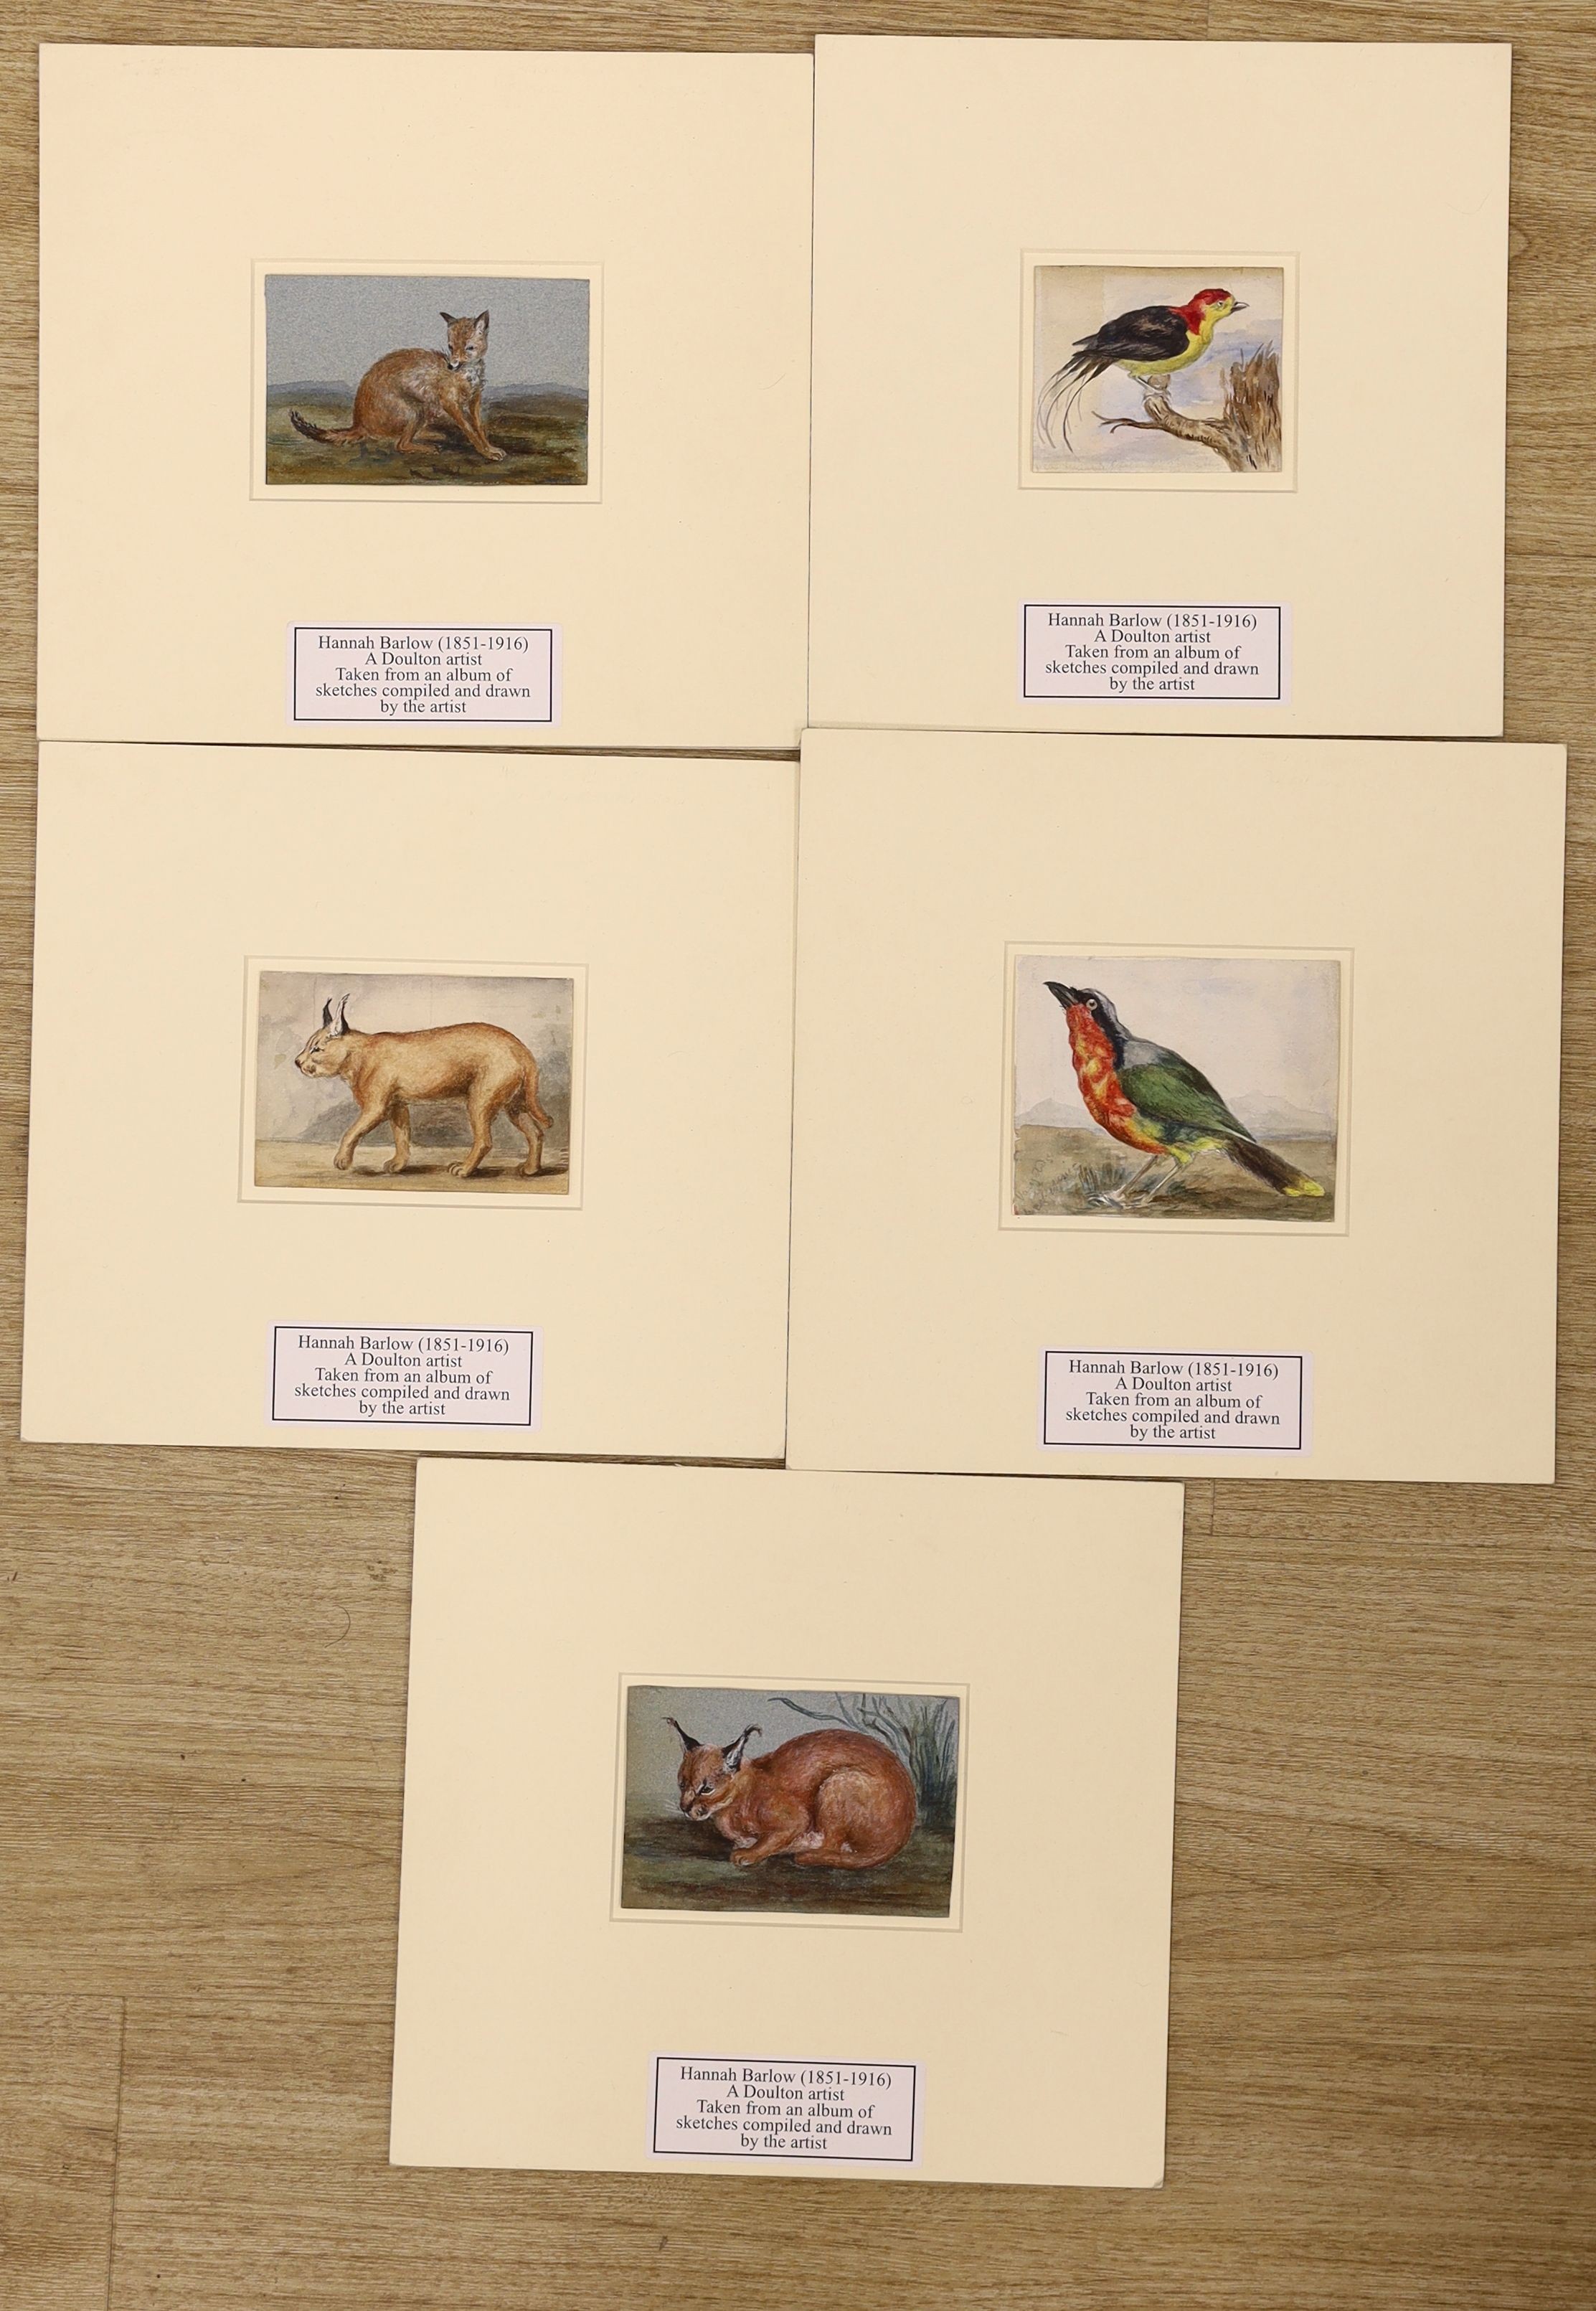 Hannah Barlow (1851-1916) - five watercolours on paper, Great African Shrike, two of Caracals, a fox and a bird of paradise, unframed, largest 9 x 11.5cm